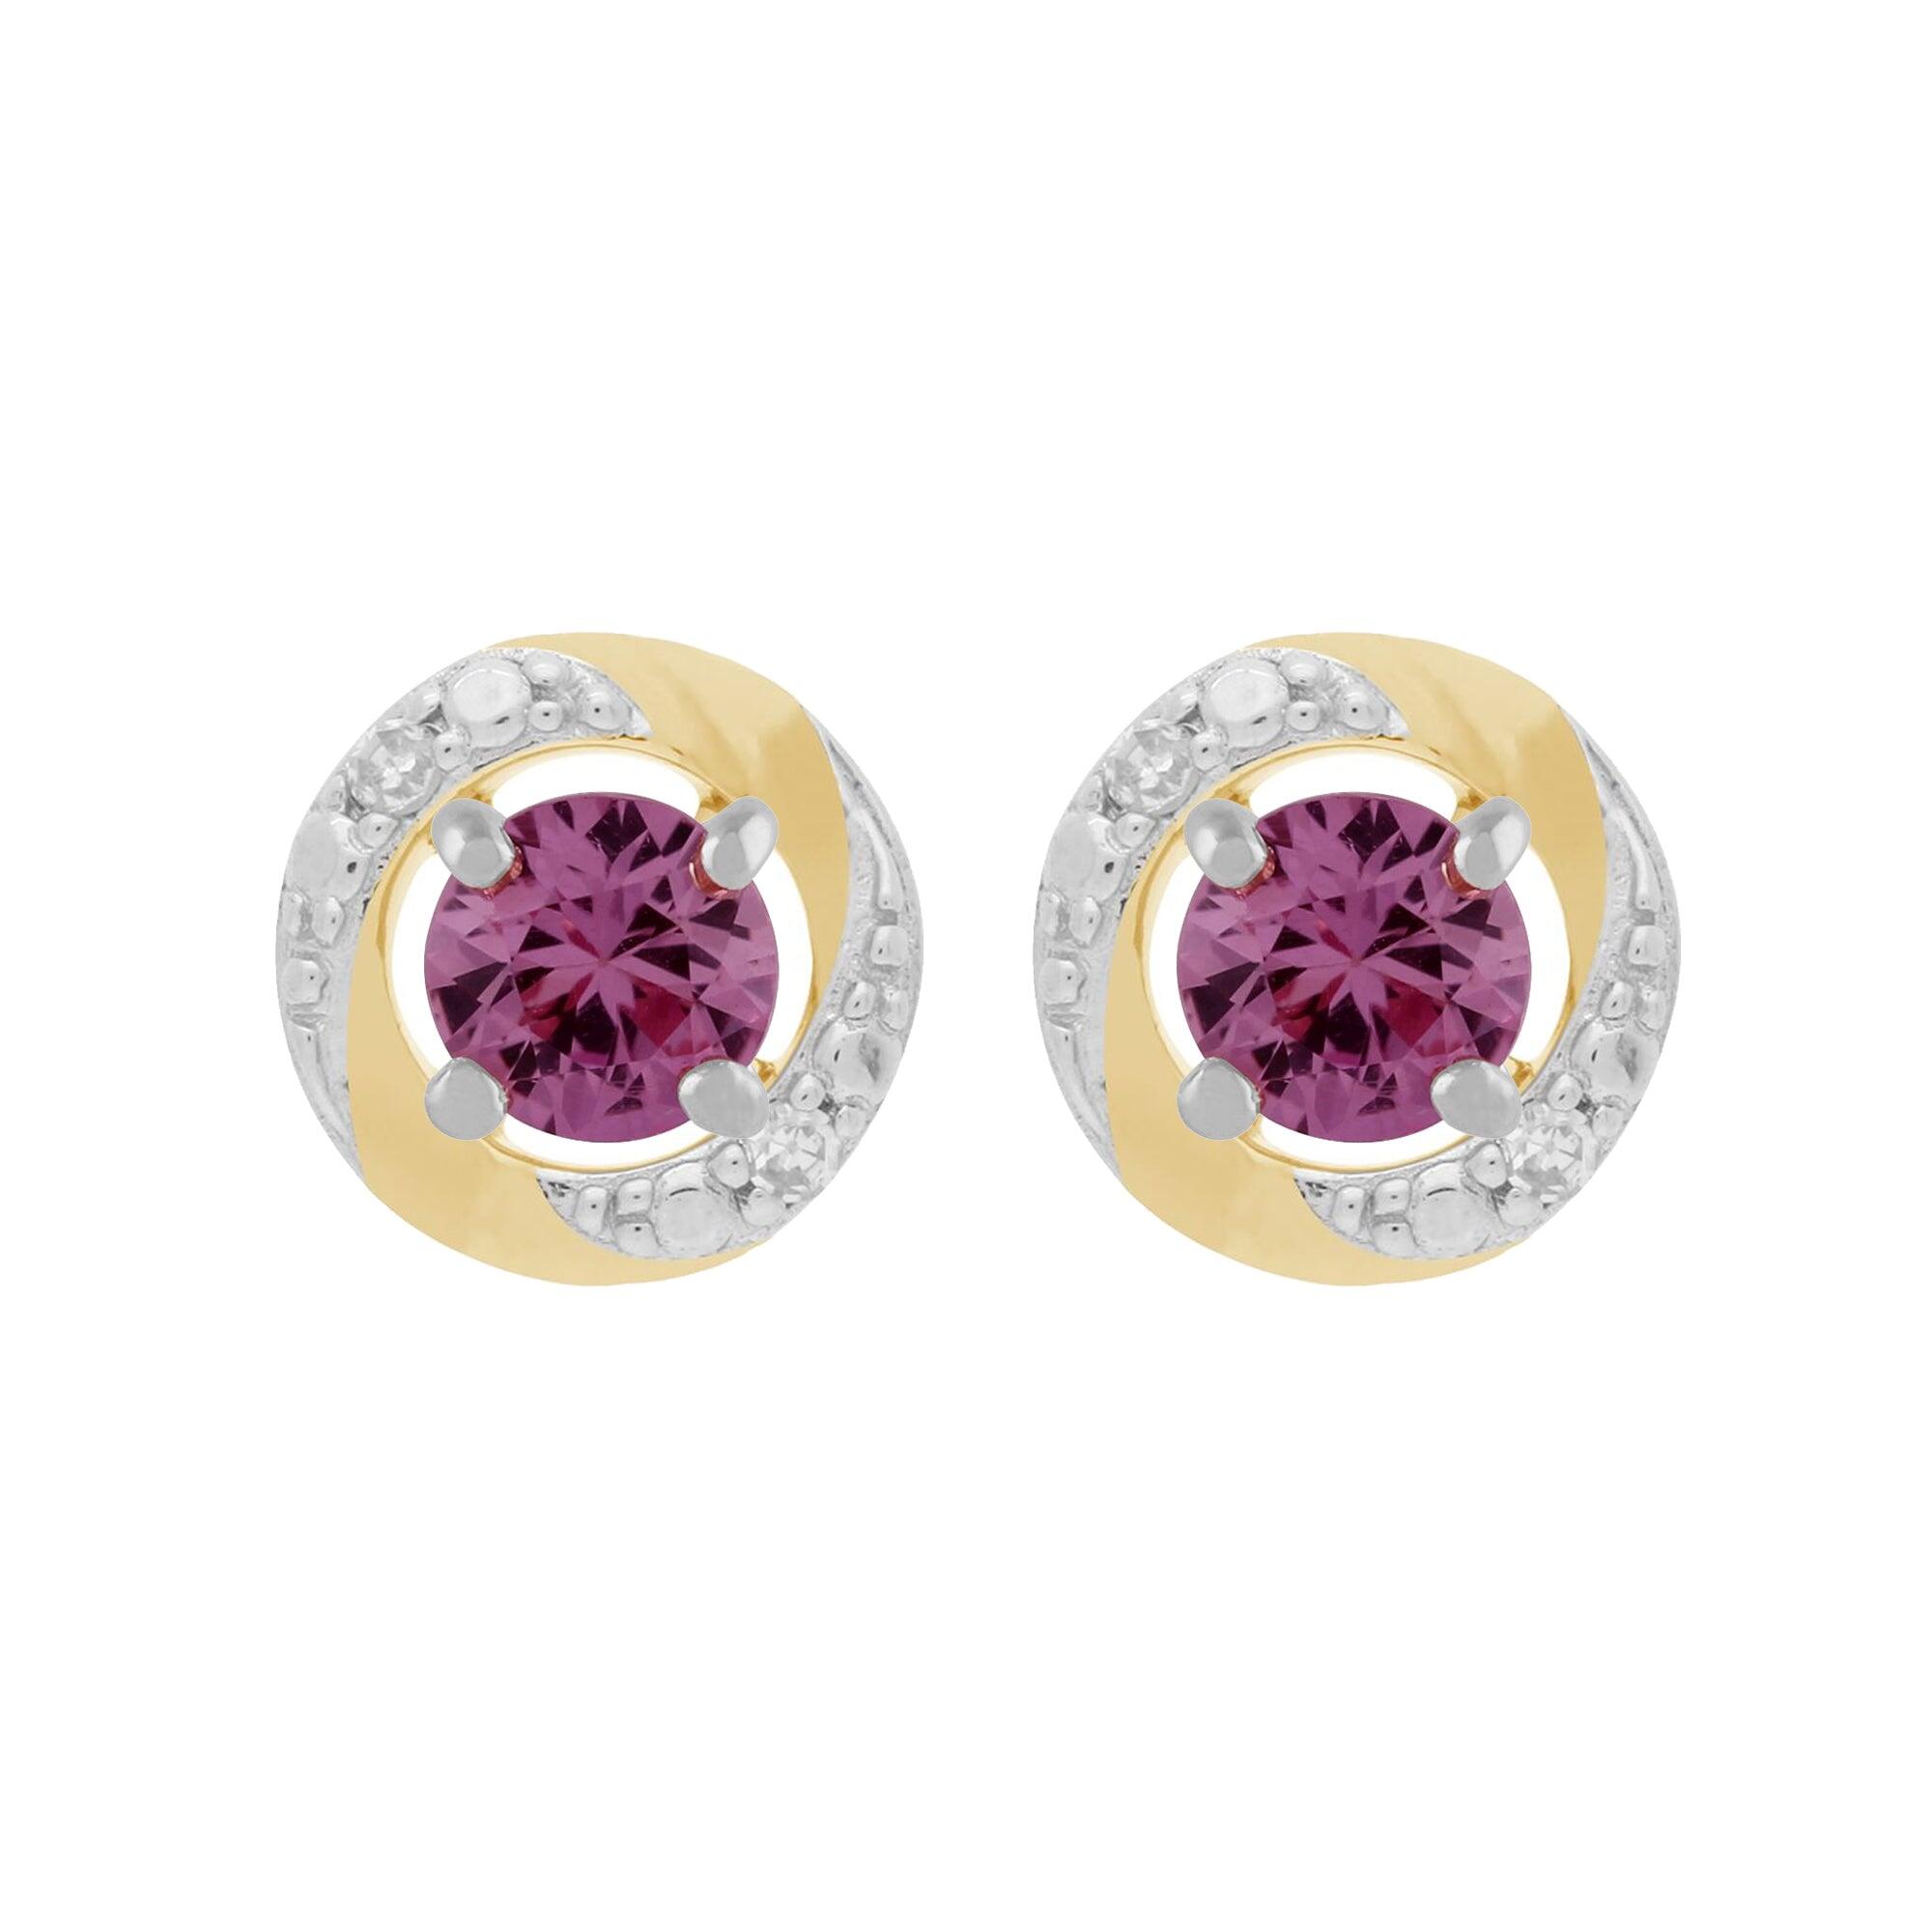 9ct White Gold Pink Sapphire Stud Earrings with Detachable Diamond Halo Ear Jacket in 9ct Yellow Gold